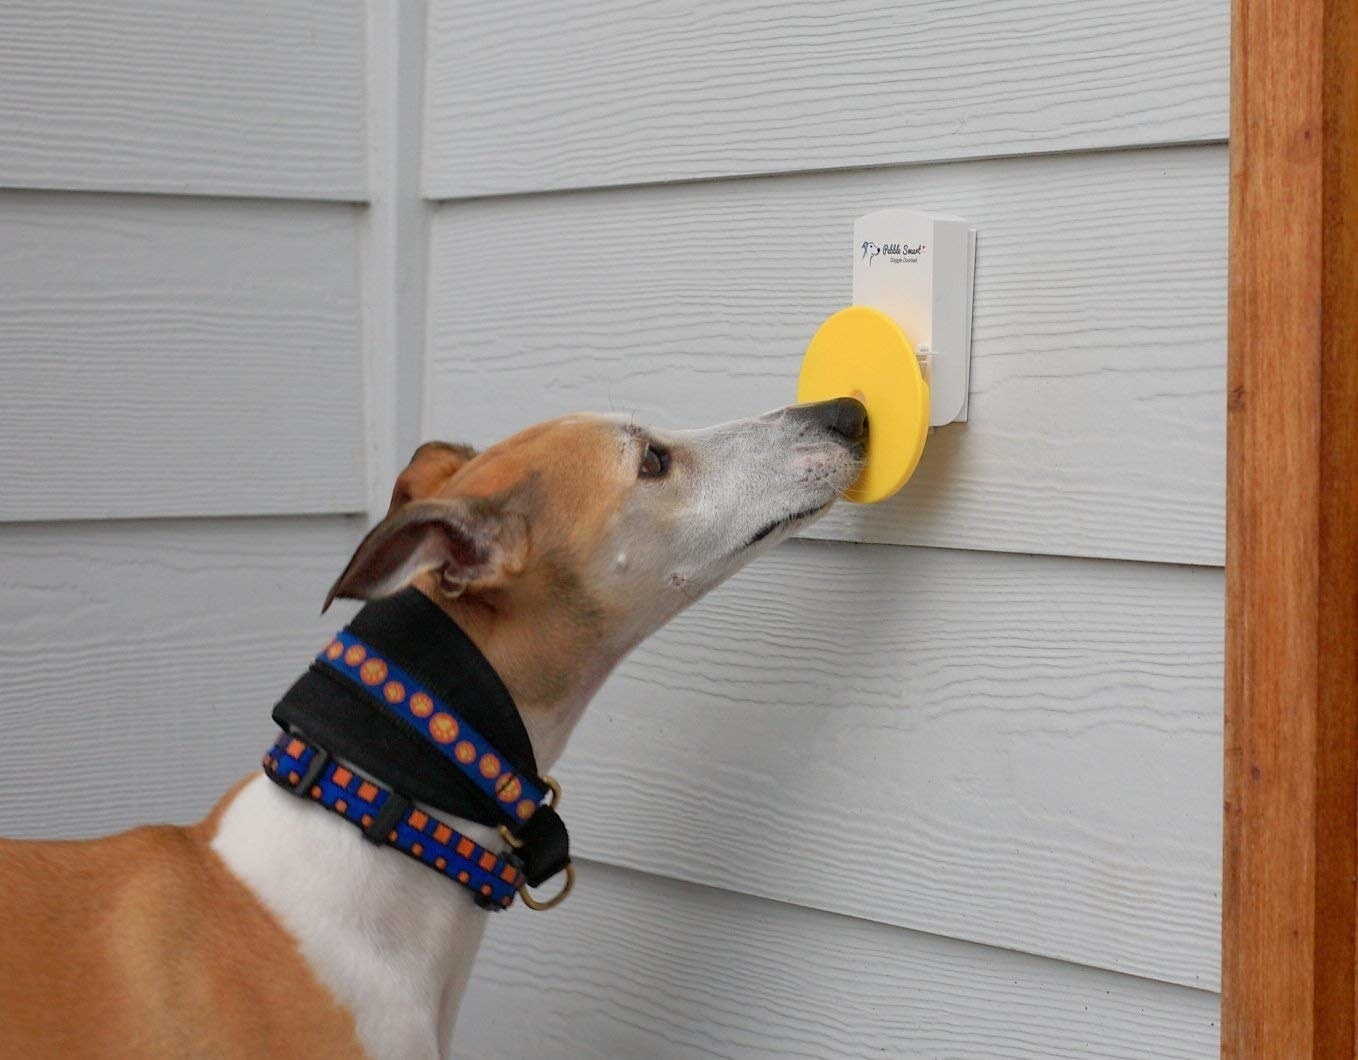 Dog using its nose to push a yellow disc on the doorbell